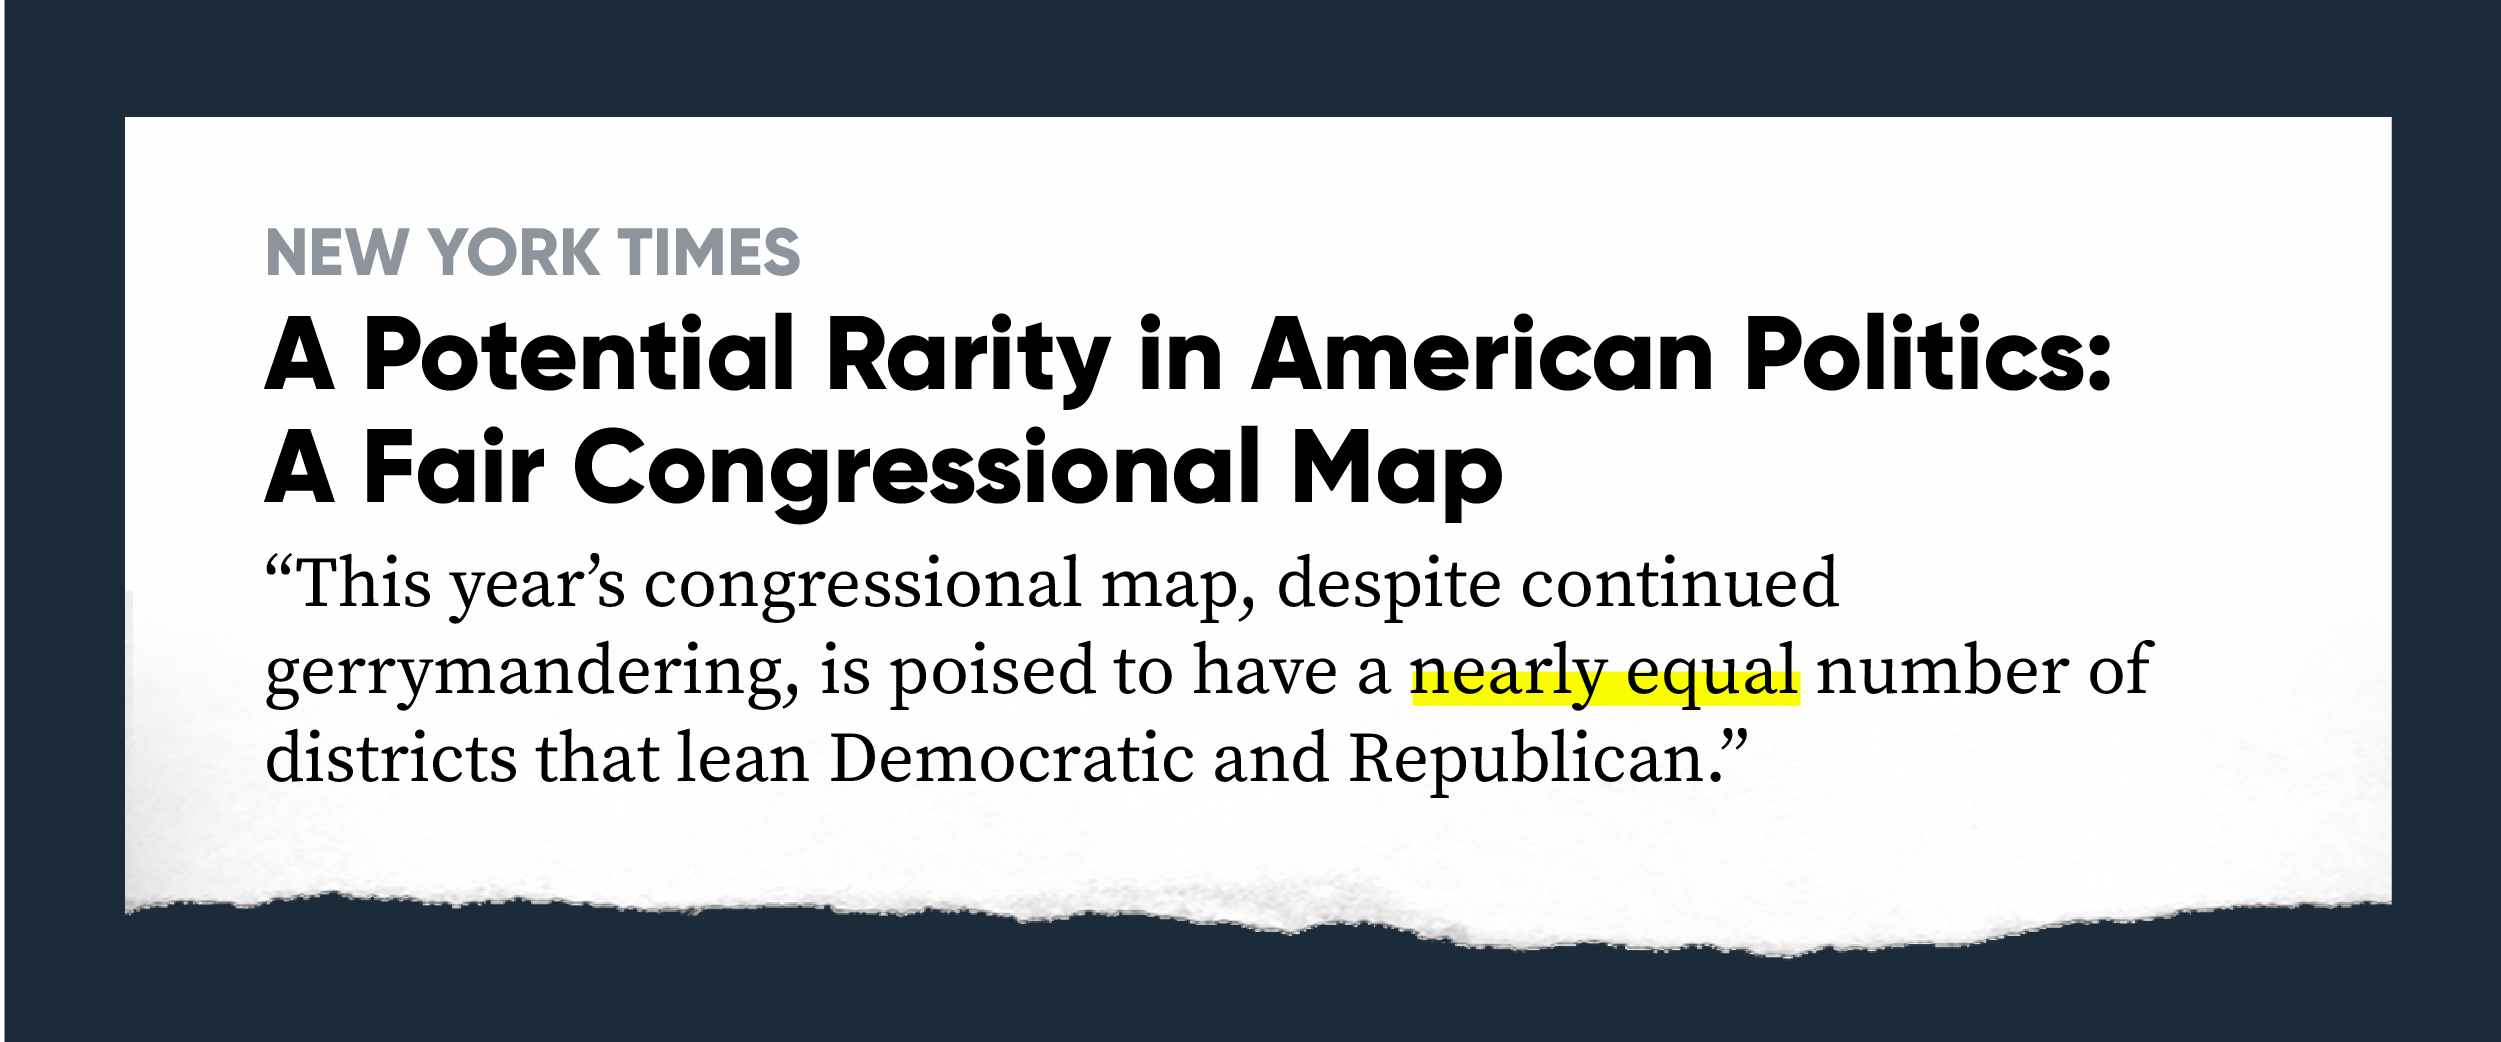 New York Times: A Potential Rarity in American Politics: A Fair Congressional Map This year’s congressional map, despite continued gerrymandering, is poised to have a nearly equal number of districts that lean Democratic and Republican."